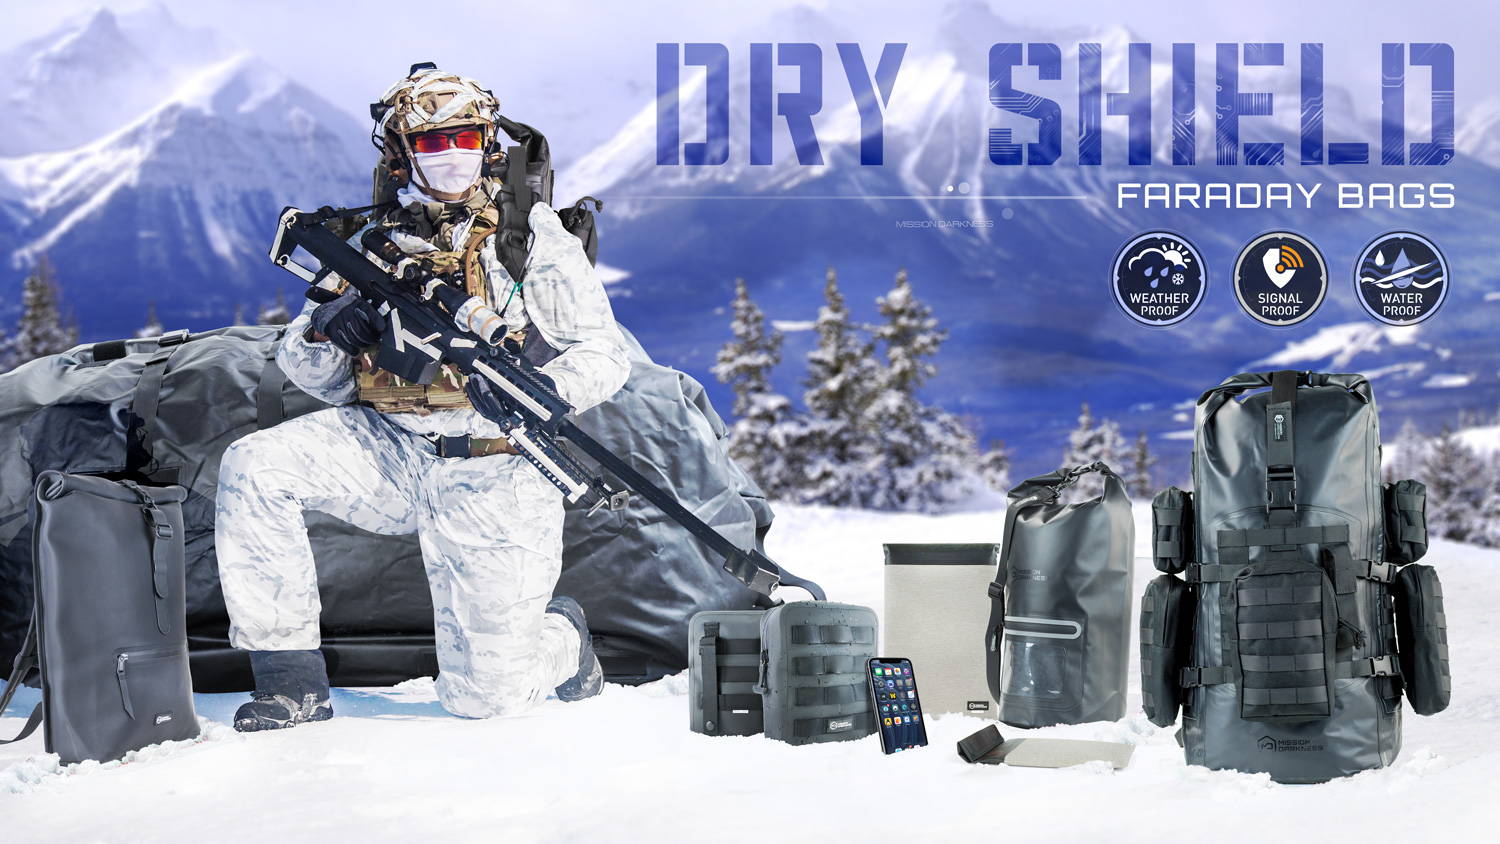 mission darkness dry shield faraday bags block wireless signals and repel water